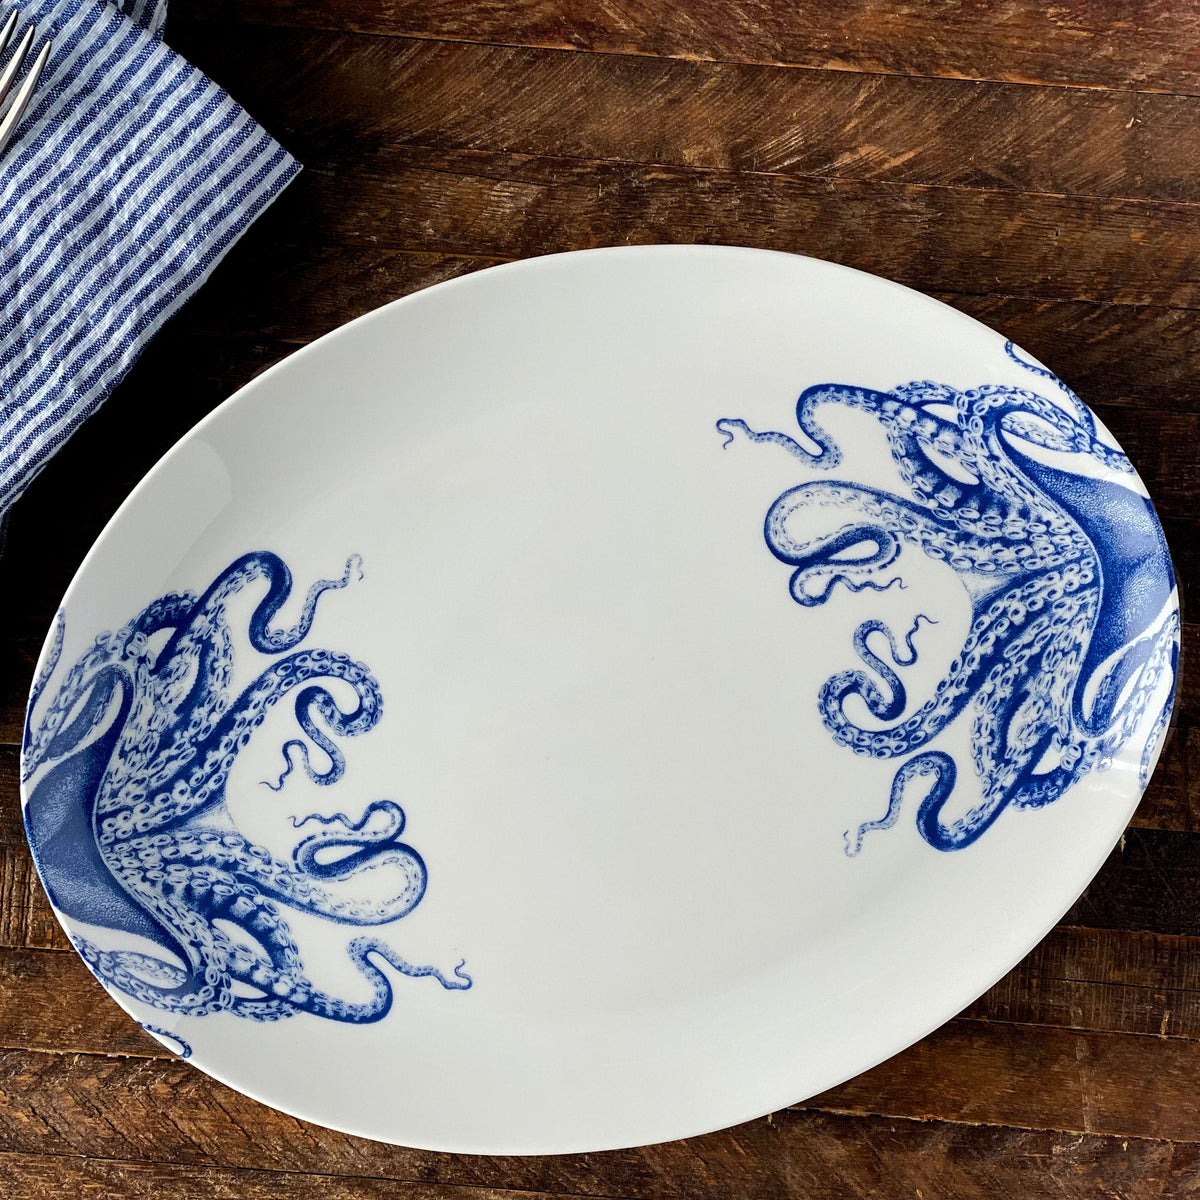 A blue on white porcelain Lucy Coupe Platter by Caskata on a rustic wooden tabletop.